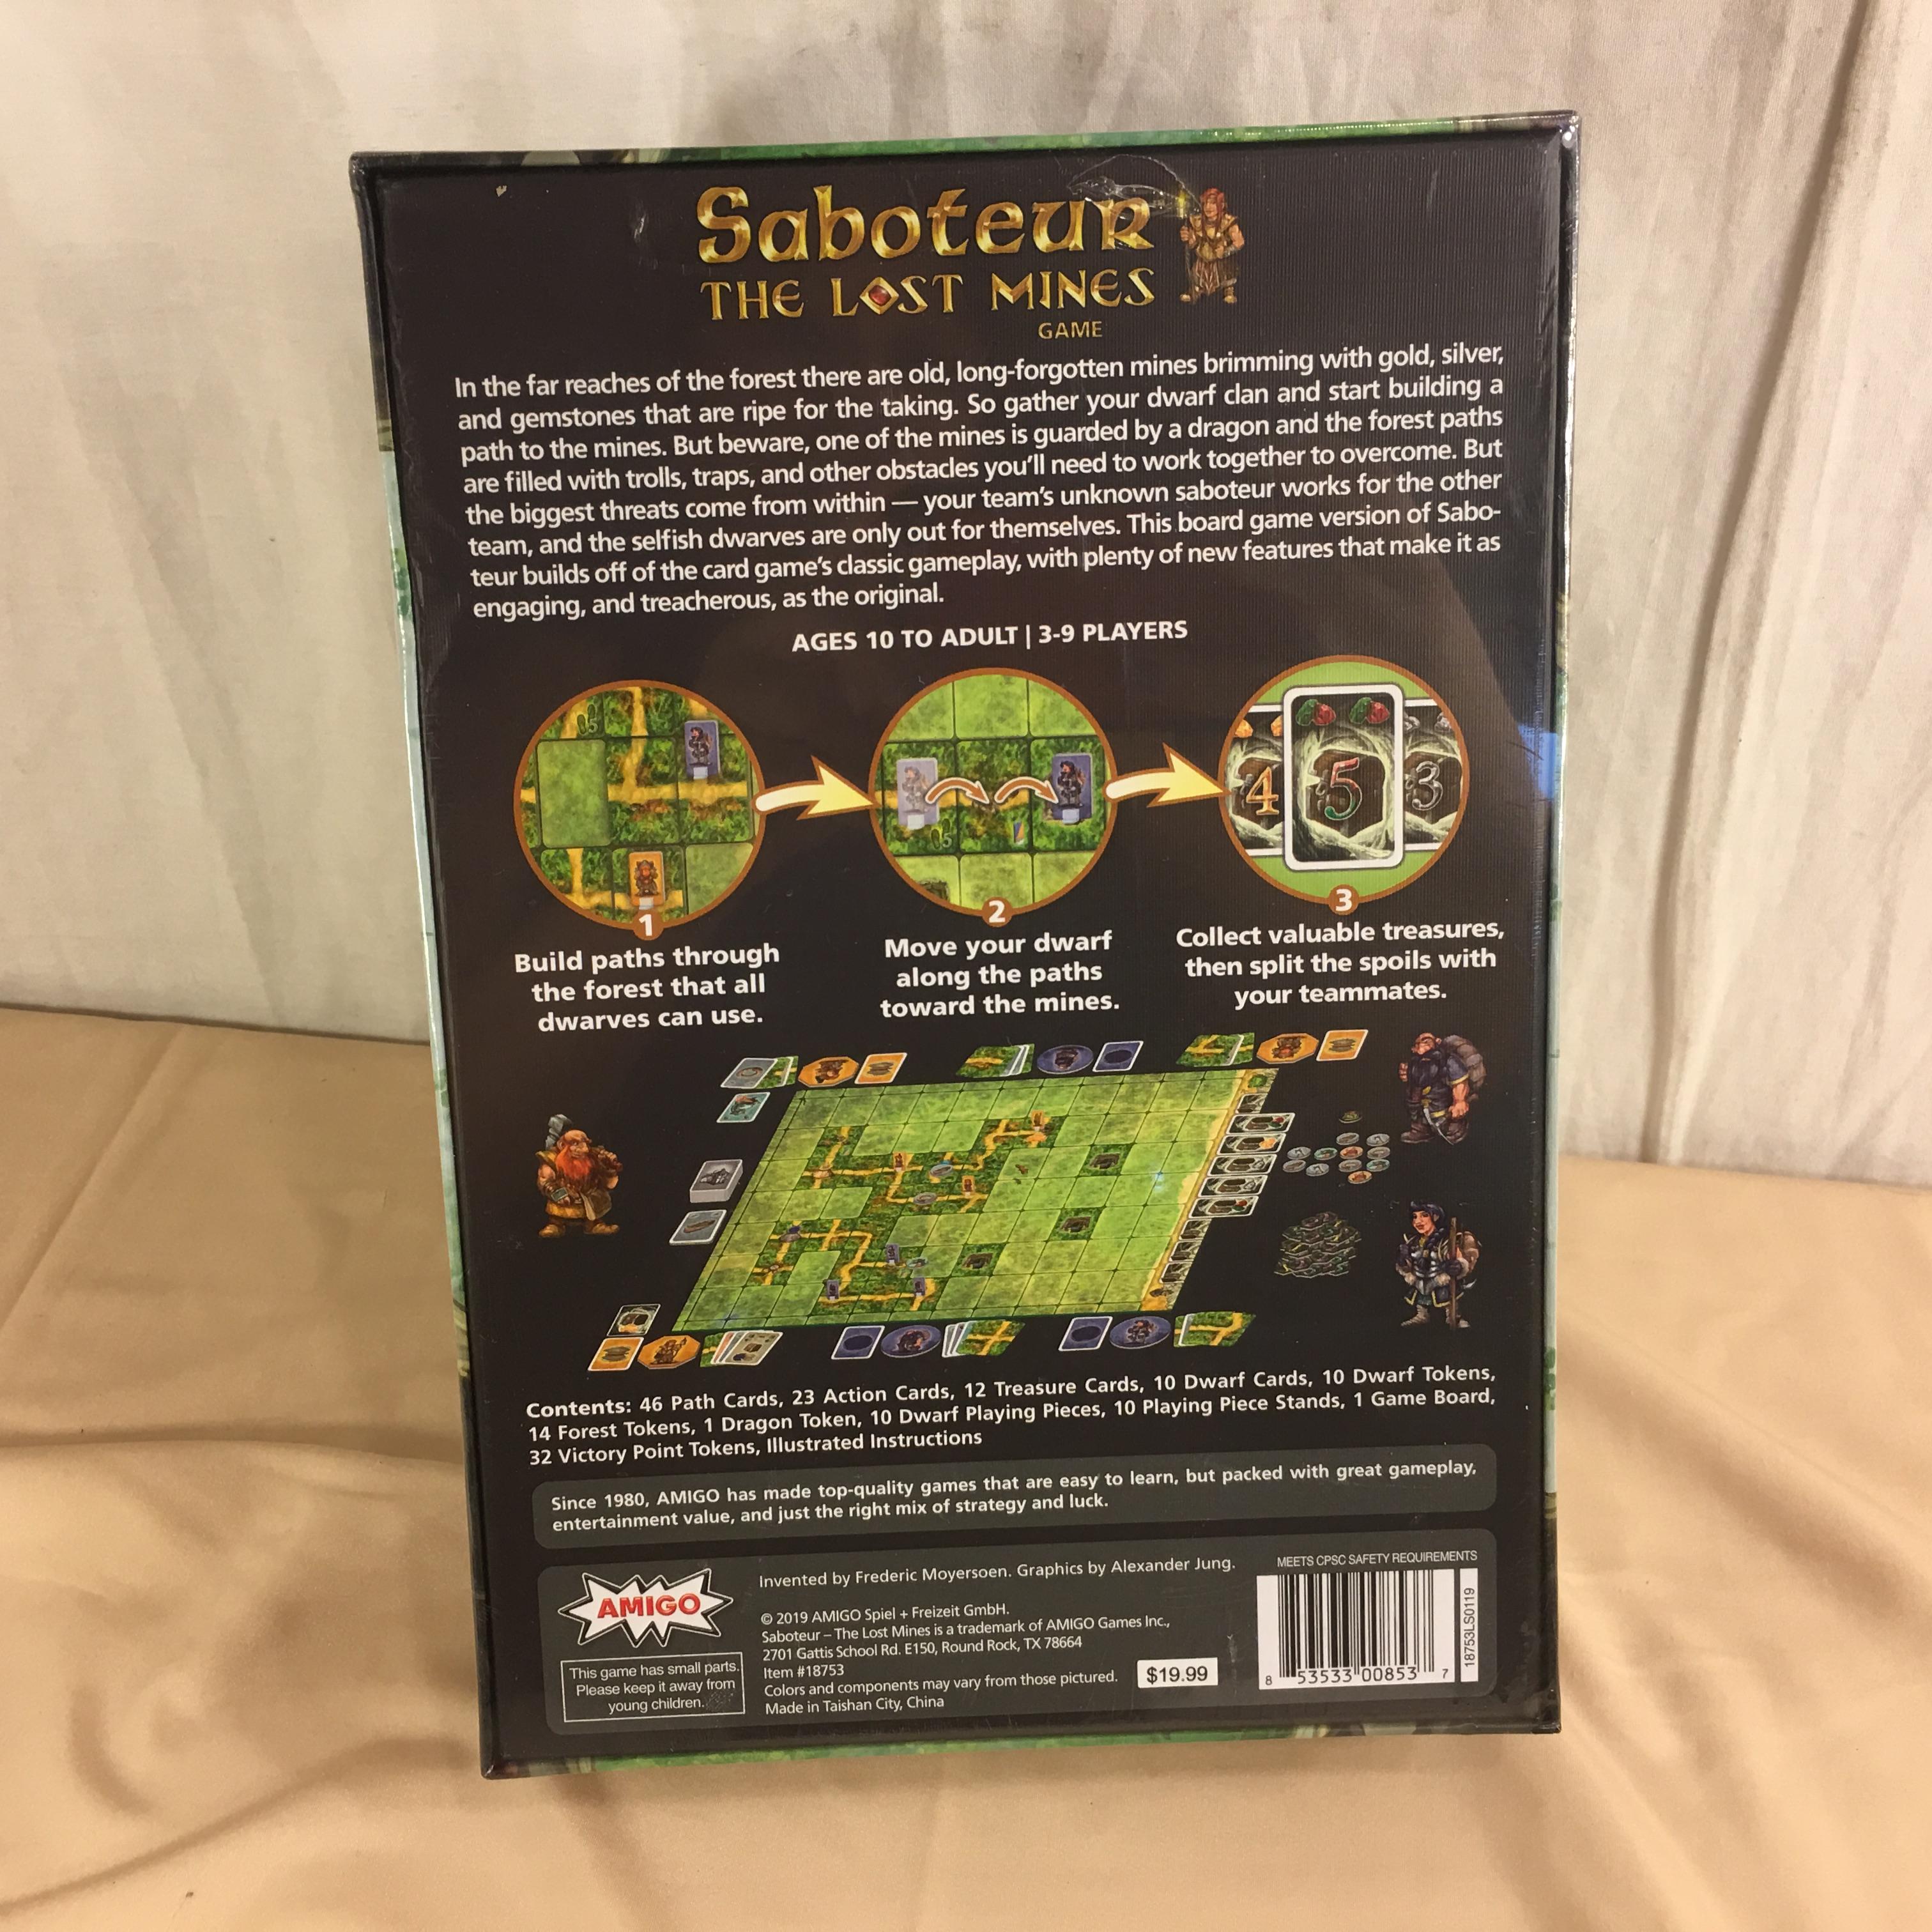 Collector New Sealed Amigo Saboteur The Lost Mines Game Ages 10 To Adult 7.1/2x 11"